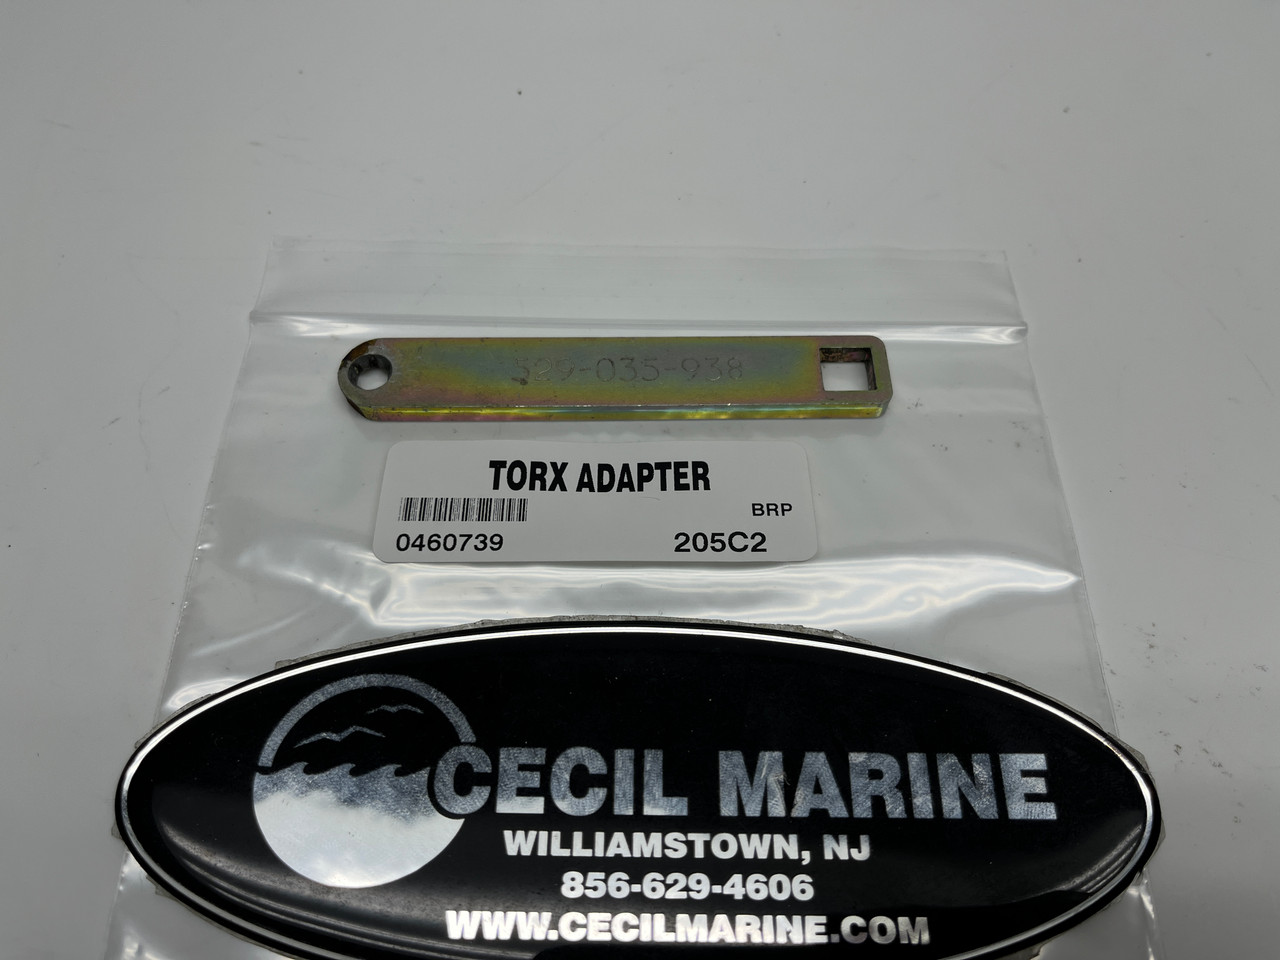 $44.95* GENUINE BRP no tax* TORX ADAPTER  460739  *In Stock & Ready To Ship!